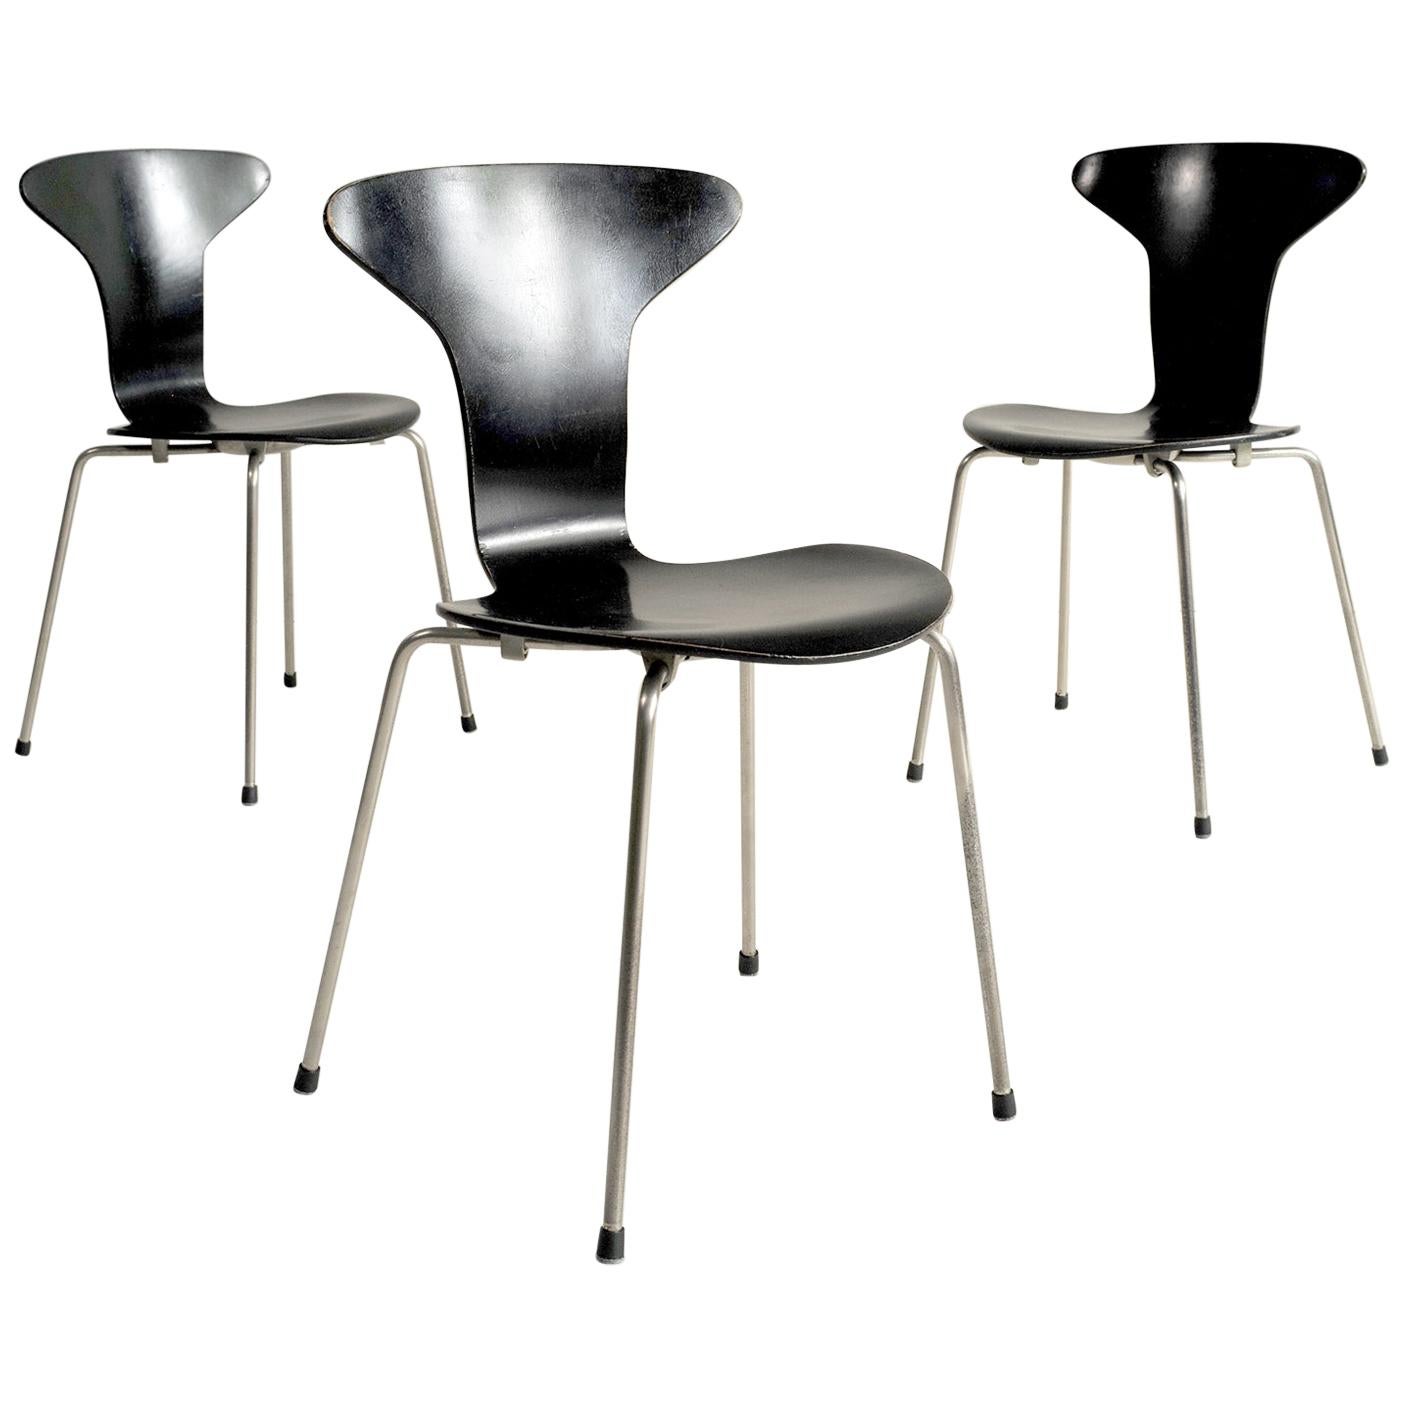 Arne Jacobsen, Set of 3 Chairs "3105", First Edition, Denmark, 1955 For Sale